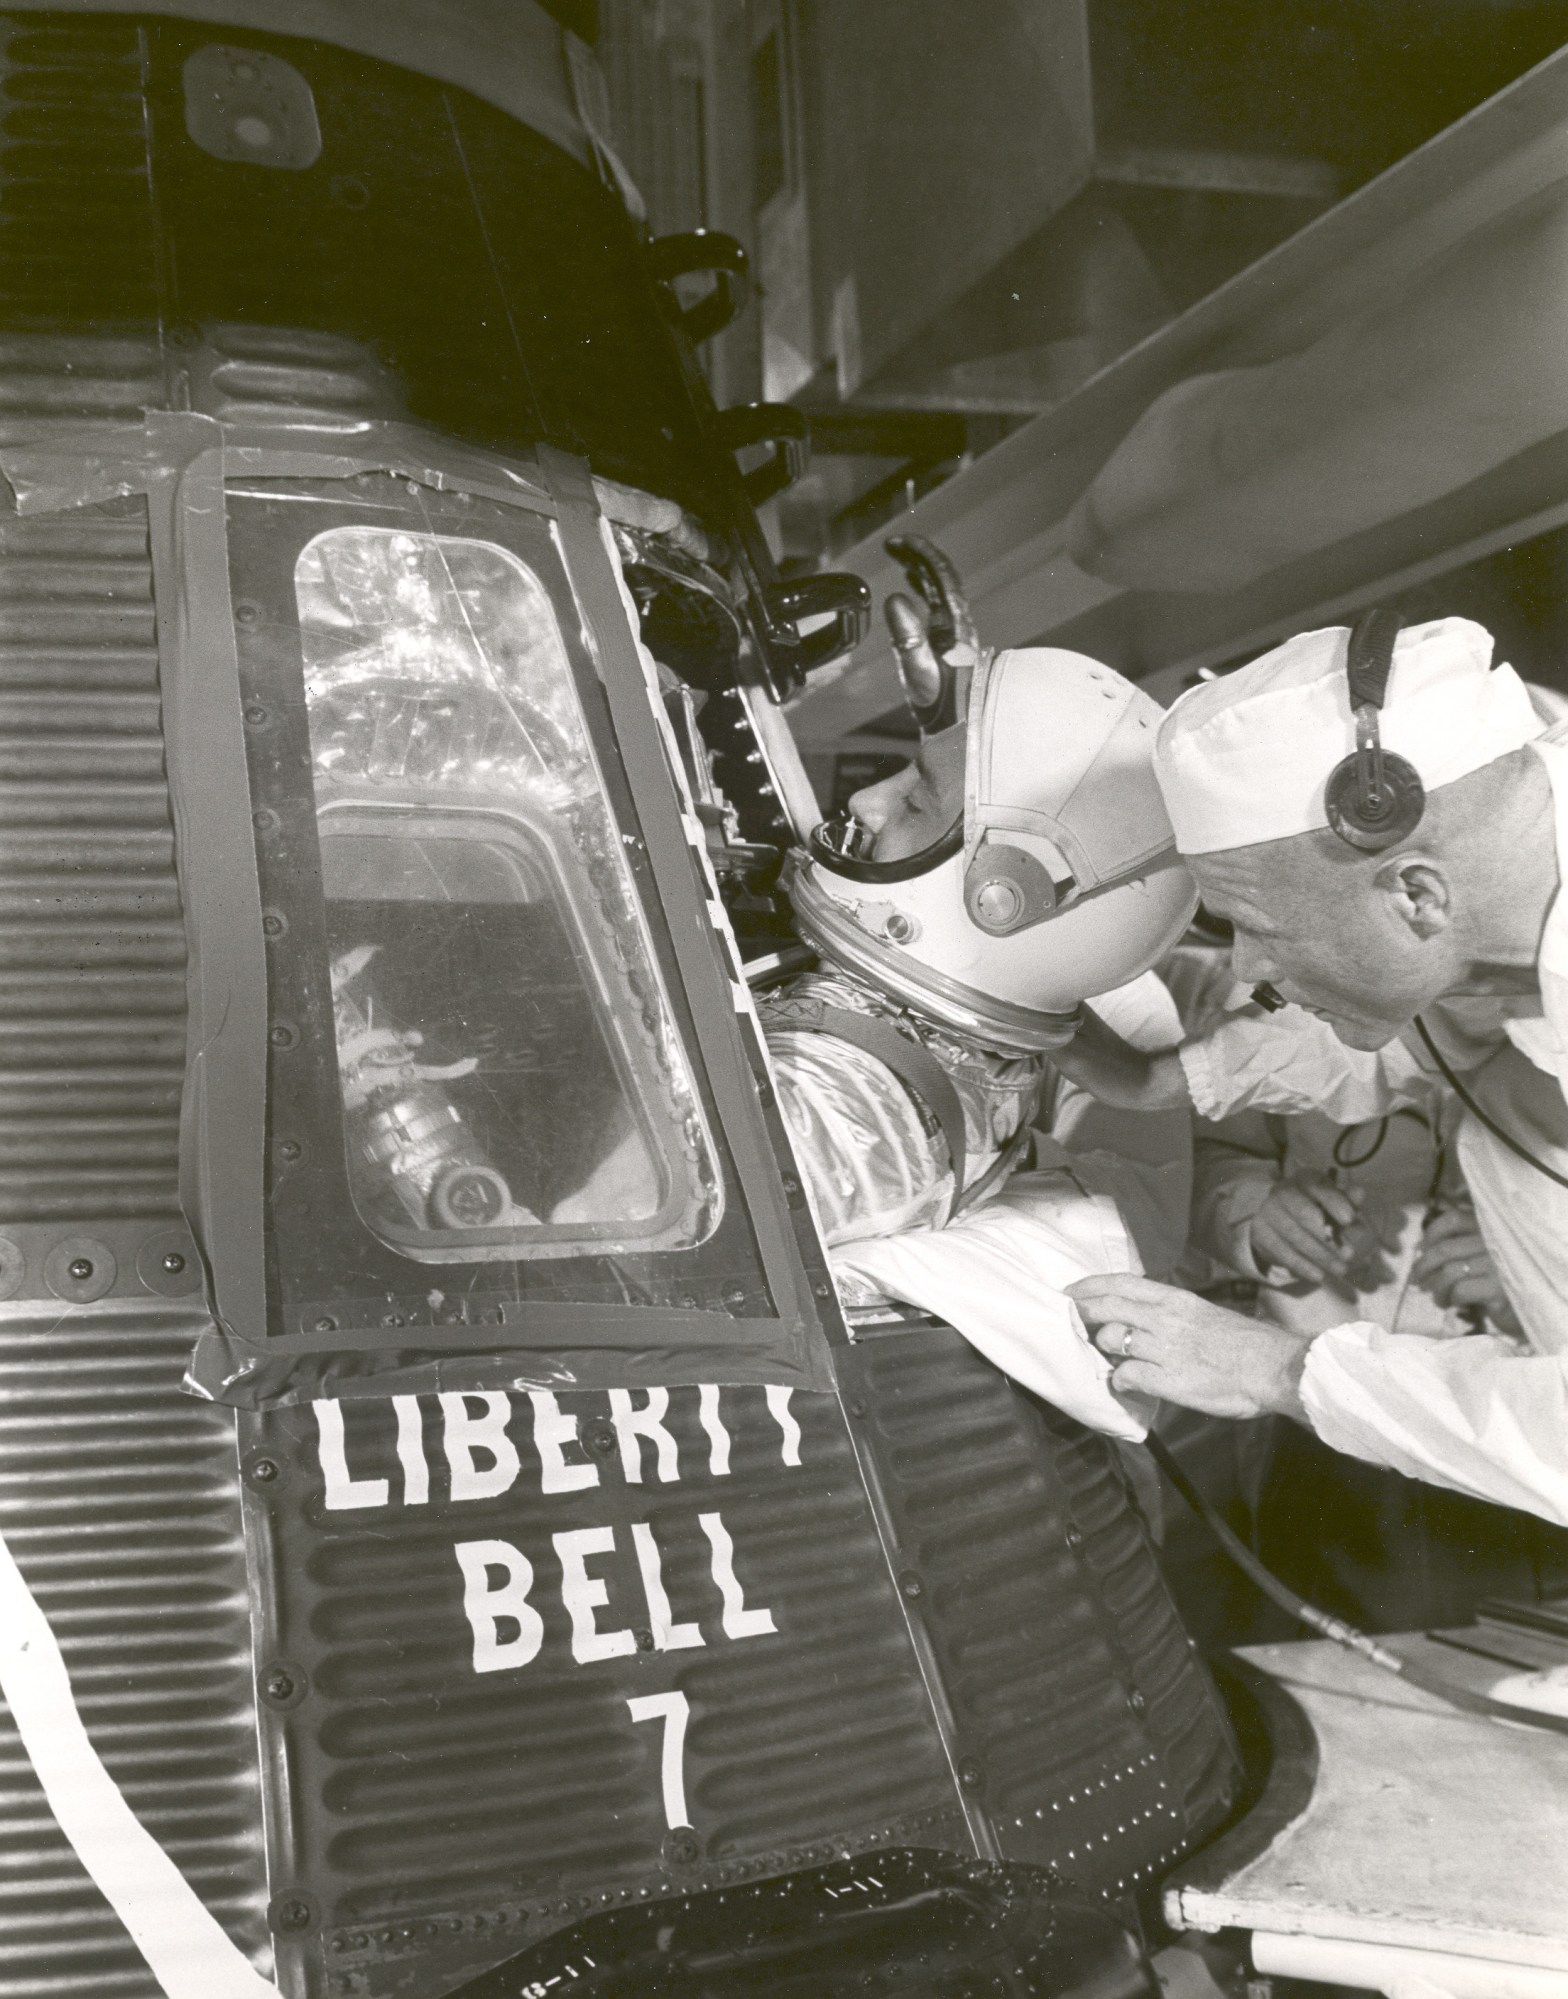 Astronaut Virgil I. Grissom climbs into "Liberty Bell 7" spacecraft the morning of July 21, 1961.